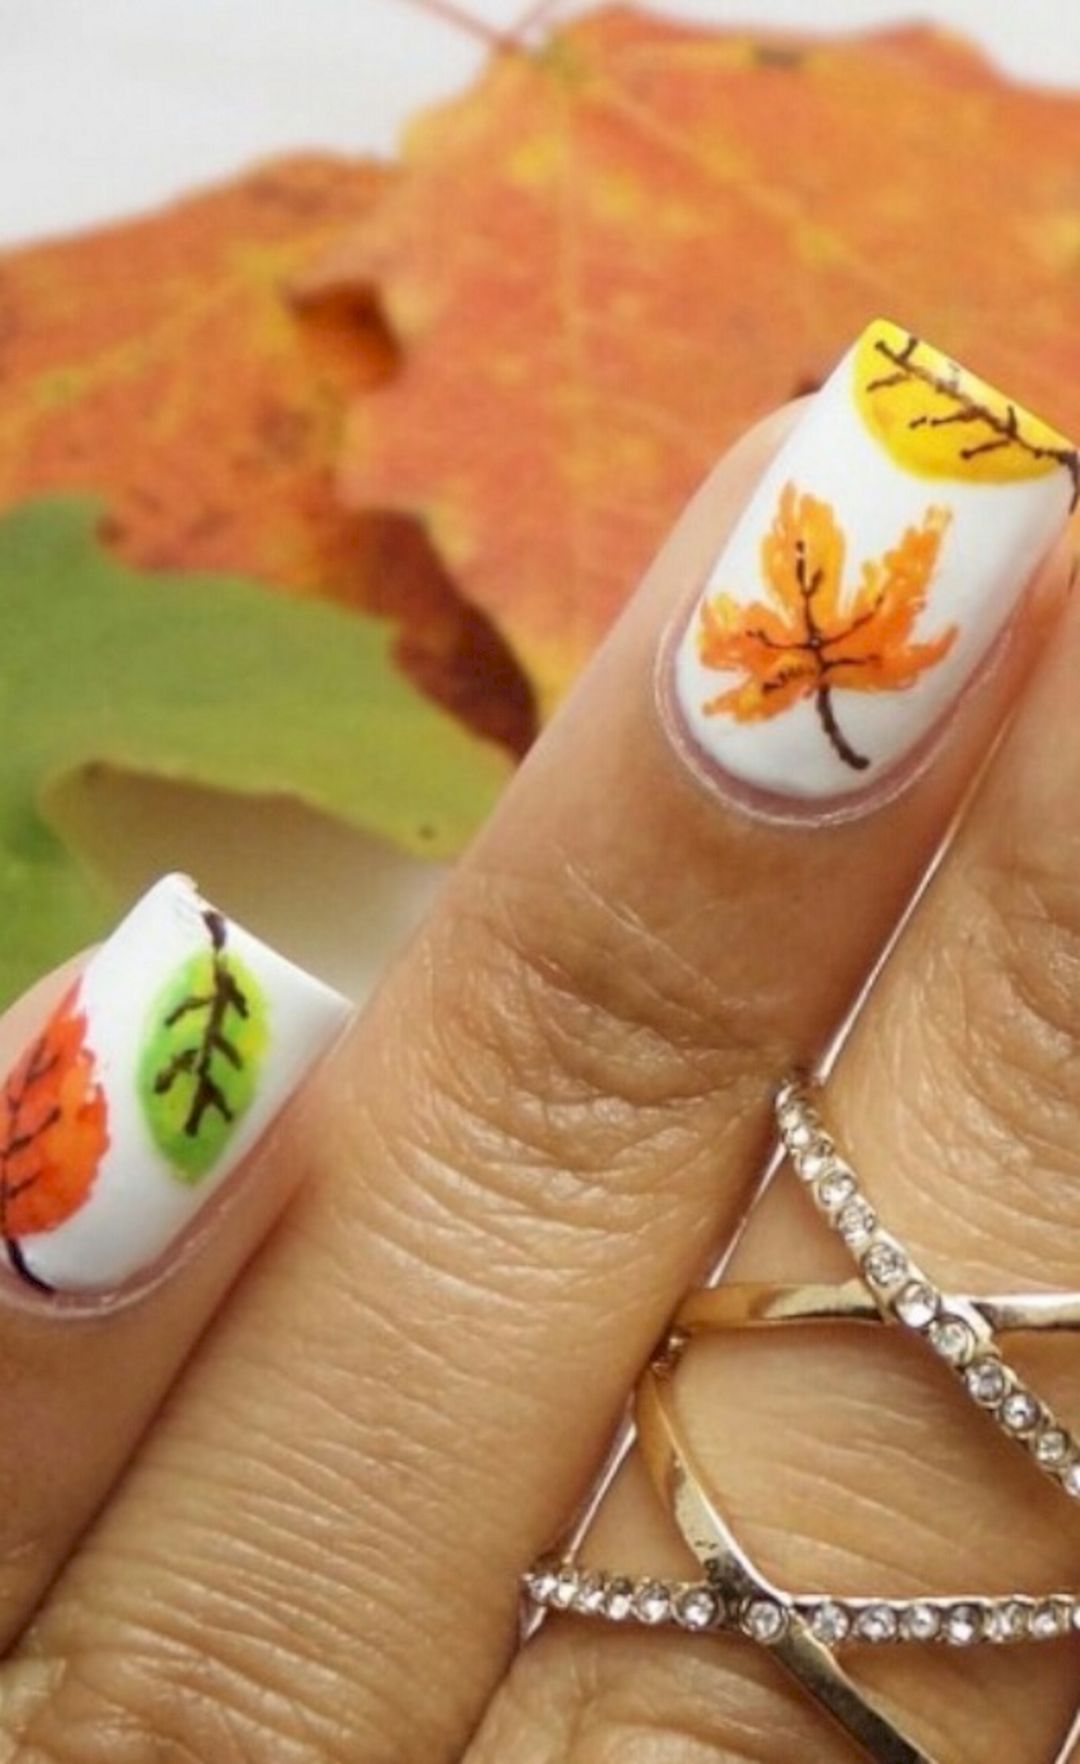 Elegant maple leaf nail art from musely